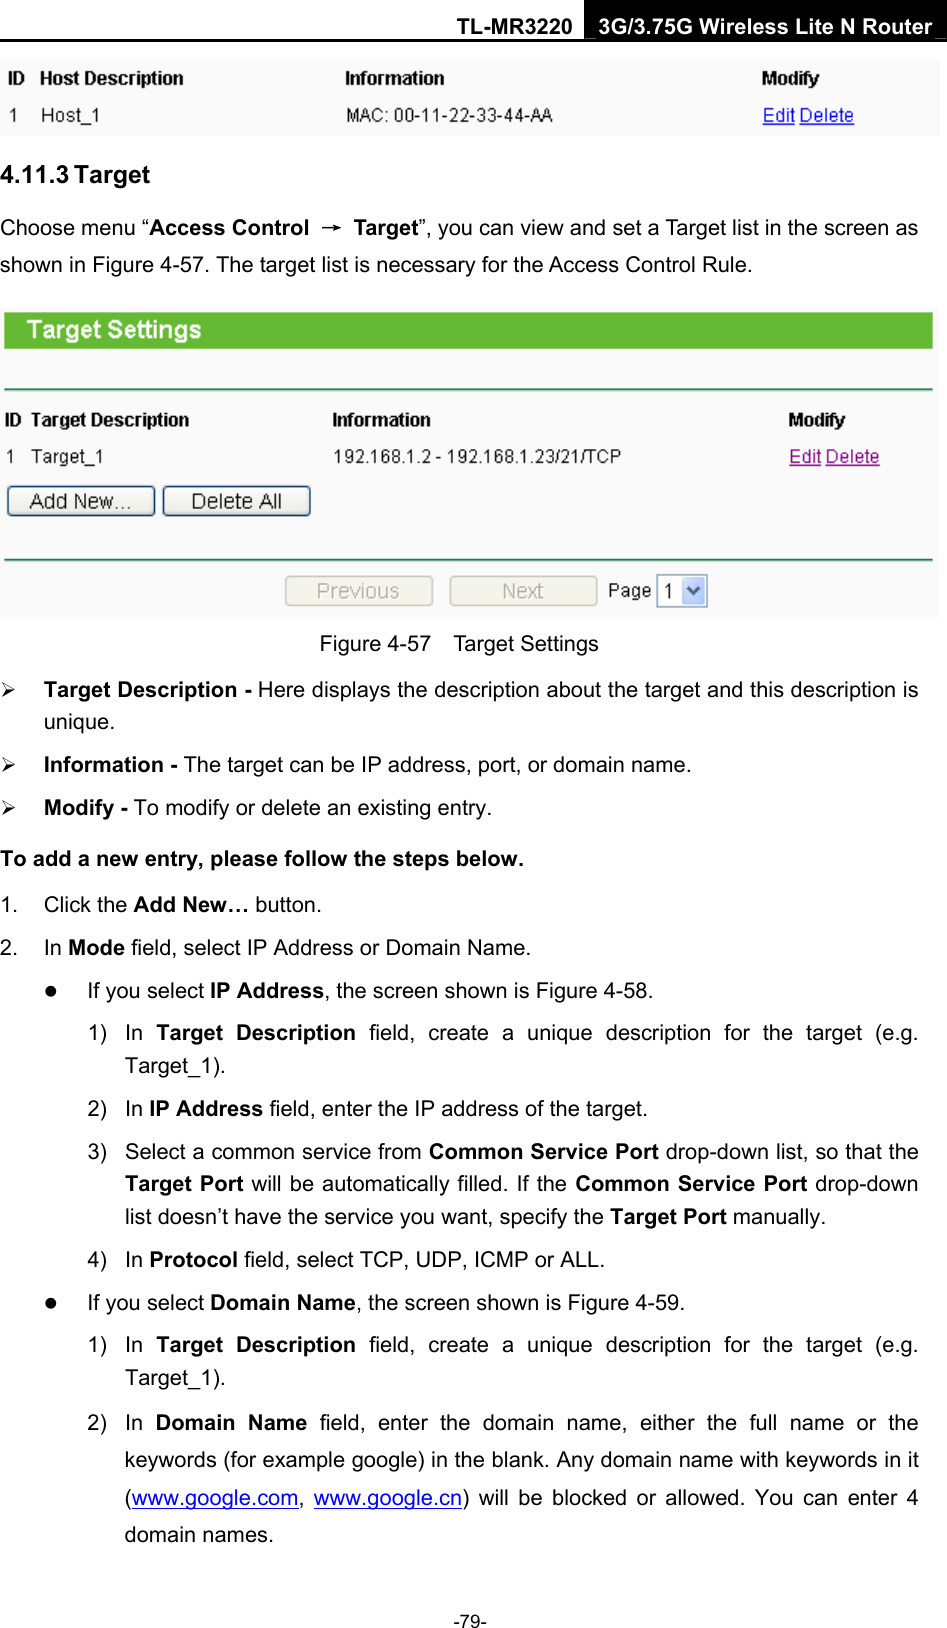 TL-MR3220 3G/3.75G Wireless Lite N Router -79-  4.11.3 Target Choose menu “Access Control  → Target”, you can view and set a Target list in the screen as shown in Figure 4-57. The target list is necessary for the Access Control Rule.  Figure 4-57  Target Settings ¾ Target Description - Here displays the description about the target and this description is unique.  ¾ Information - The target can be IP address, port, or domain name.   ¾ Modify - To modify or delete an existing entry.   To add a new entry, please follow the steps below. 1. Click the Add New… button. 2. In Mode field, select IP Address or Domain Name. z If you select IP Address, the screen shown is Figure 4-58.   1) In Target Description field, create a unique description for the target (e.g. Target_1). 2) In IP Address field, enter the IP address of the target. 3)  Select a common service from Common Service Port drop-down list, so that the Target Port will be automatically filled. If the Common Service Port drop-down list doesn’t have the service you want, specify the Target Port manually. 4) In Protocol field, select TCP, UDP, ICMP or ALL.  z If you select Domain Name, the screen shown is Figure 4-59. 1) In Target Description field, create a unique description for the target (e.g. Target_1). 2) In Domain Name field, enter the domain name, either the full name or the keywords (for example google) in the blank. Any domain name with keywords in it (www.google.com,  www.google.cn) will be blocked or allowed. You can enter 4 domain names. 